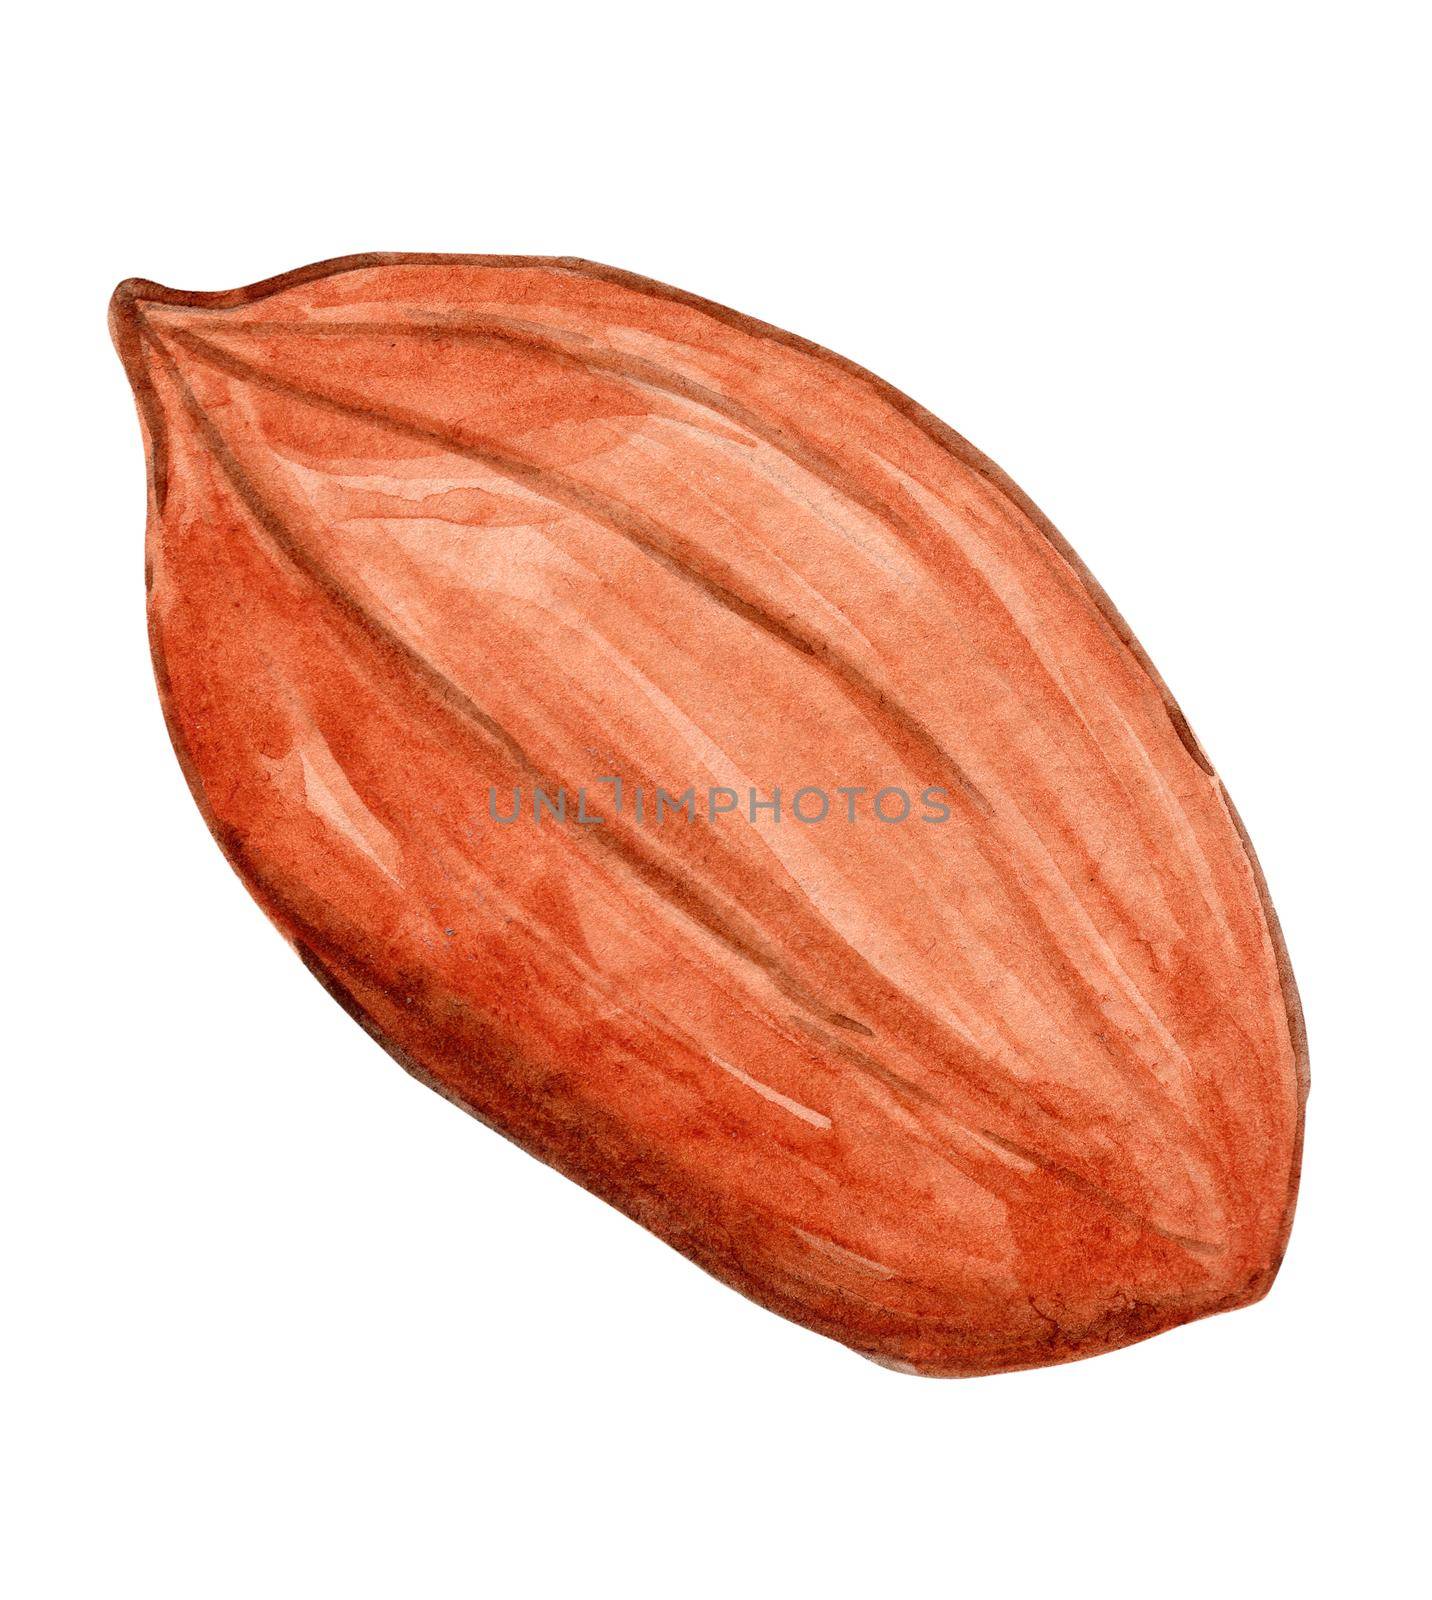 watercolor brown peanut in peel isolated on white background. by dreamloud